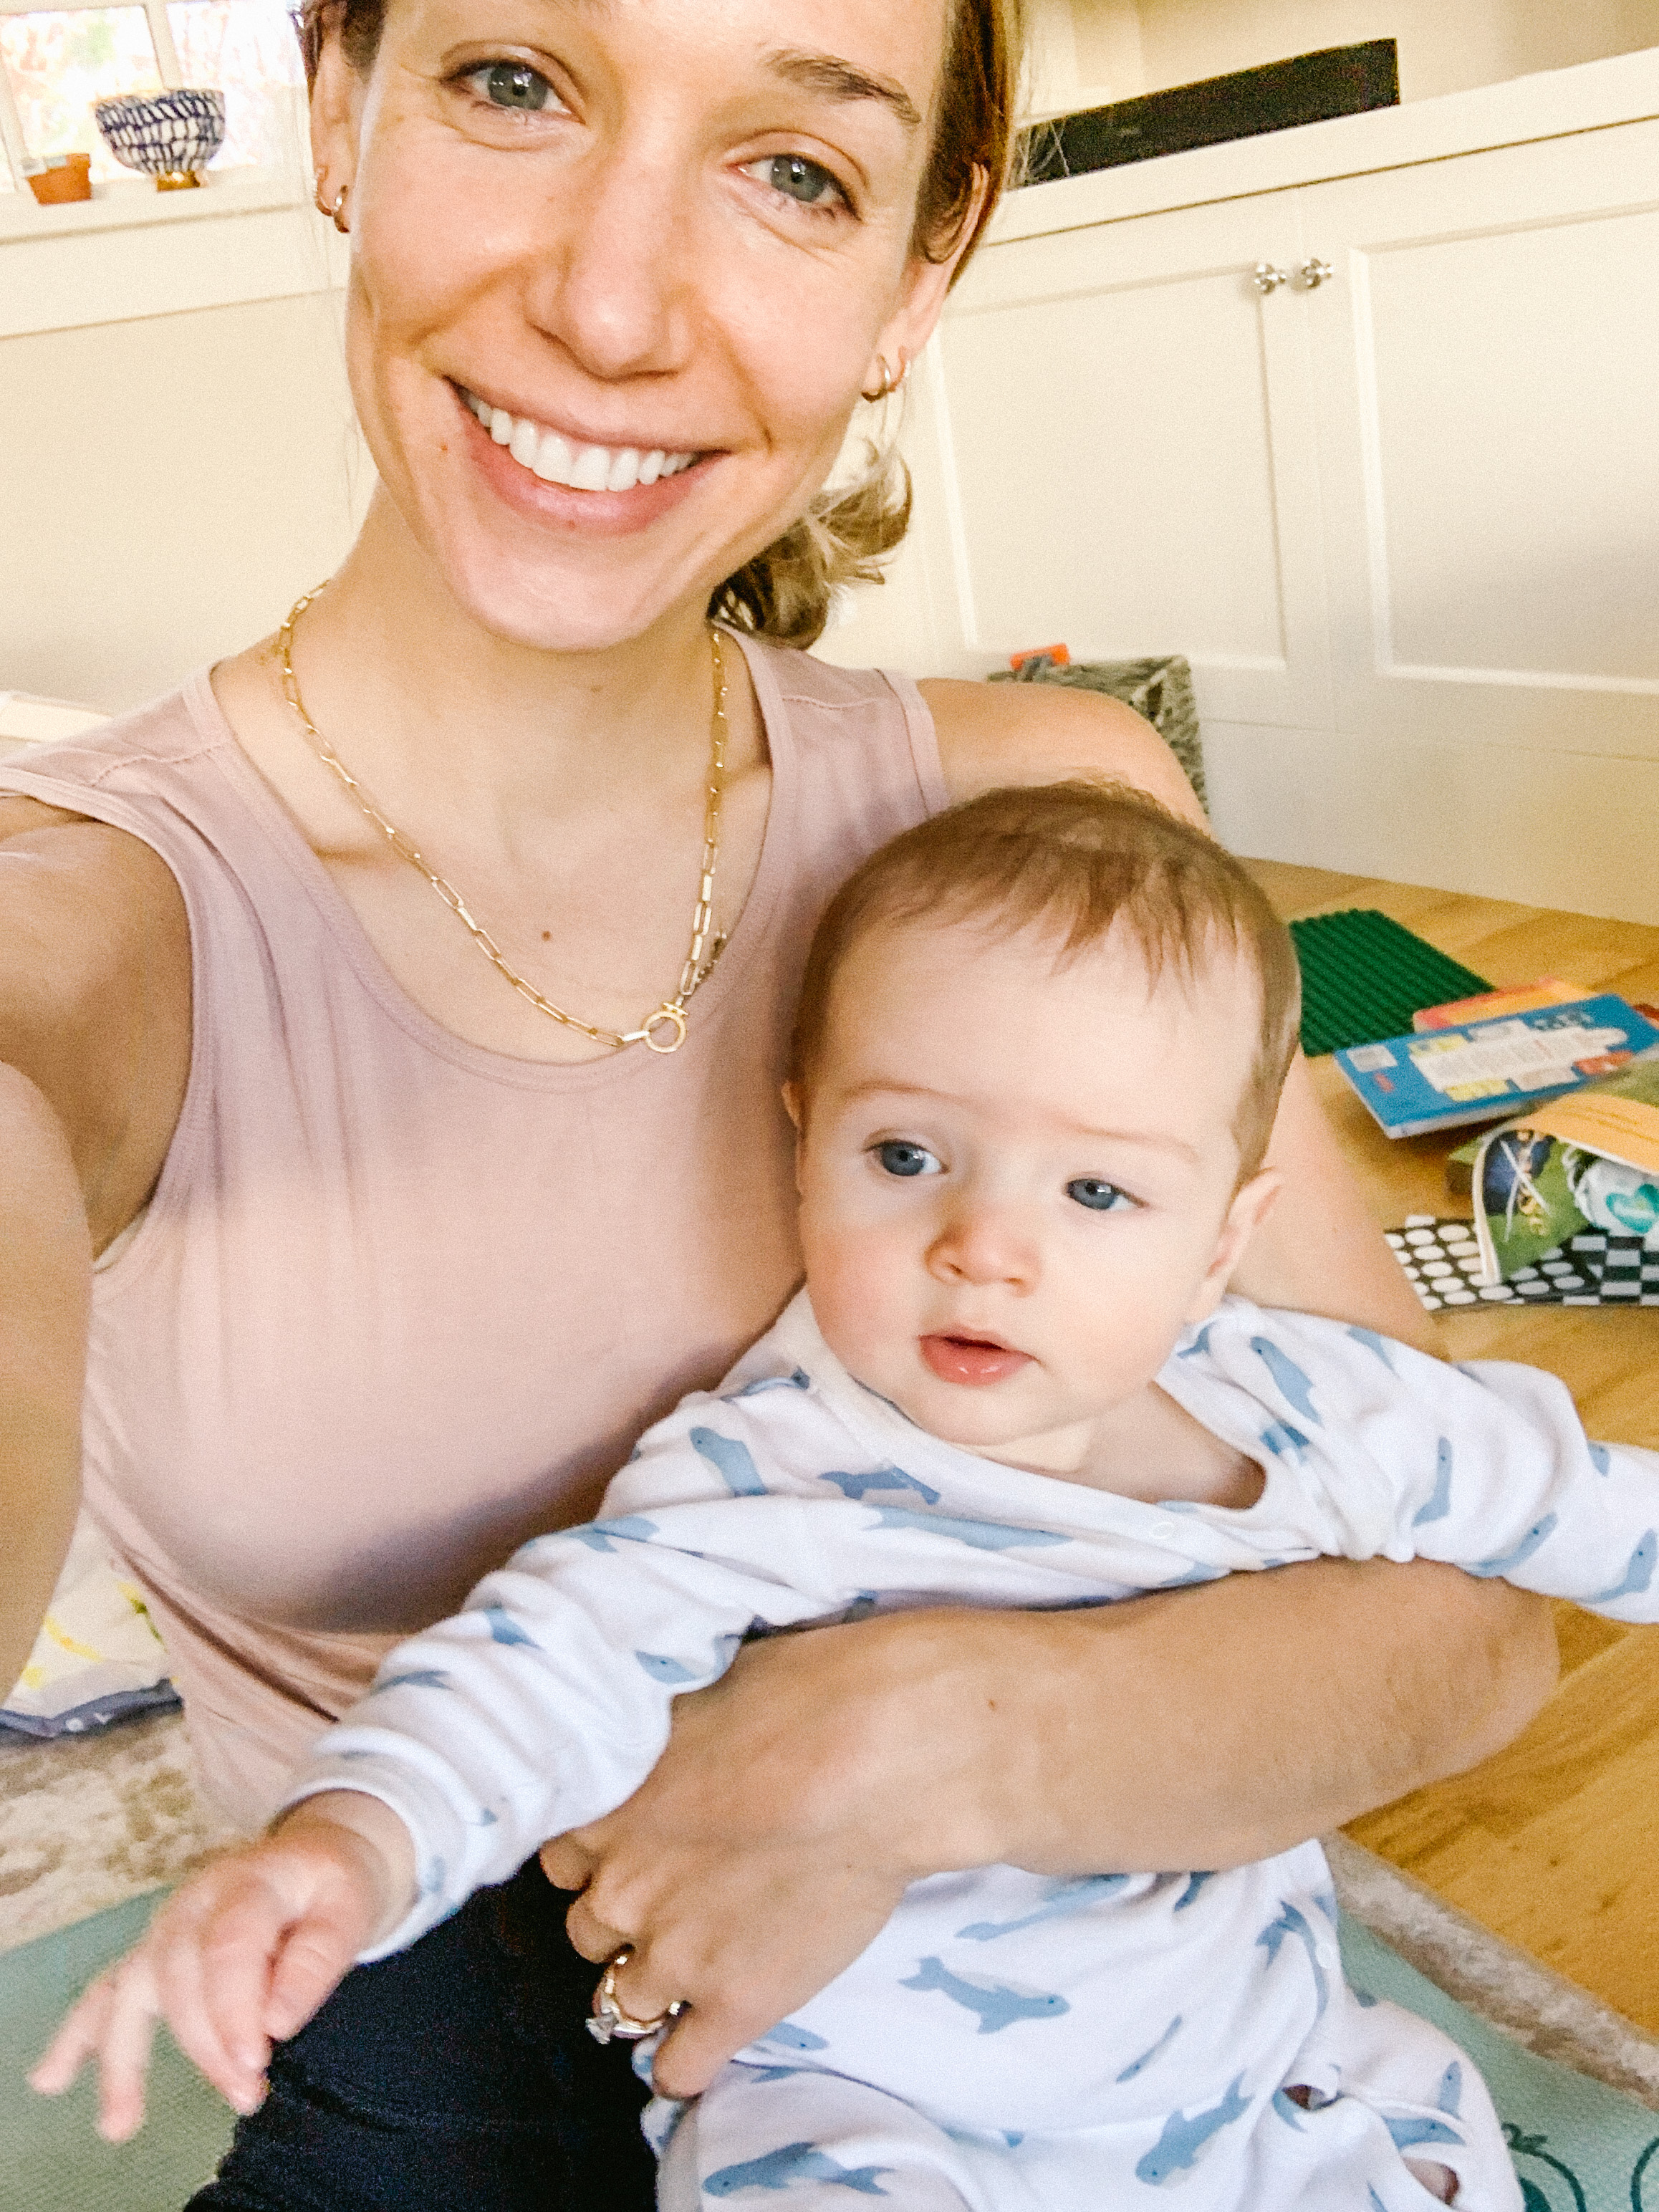 post-weaning anxiety and postpartum struggles